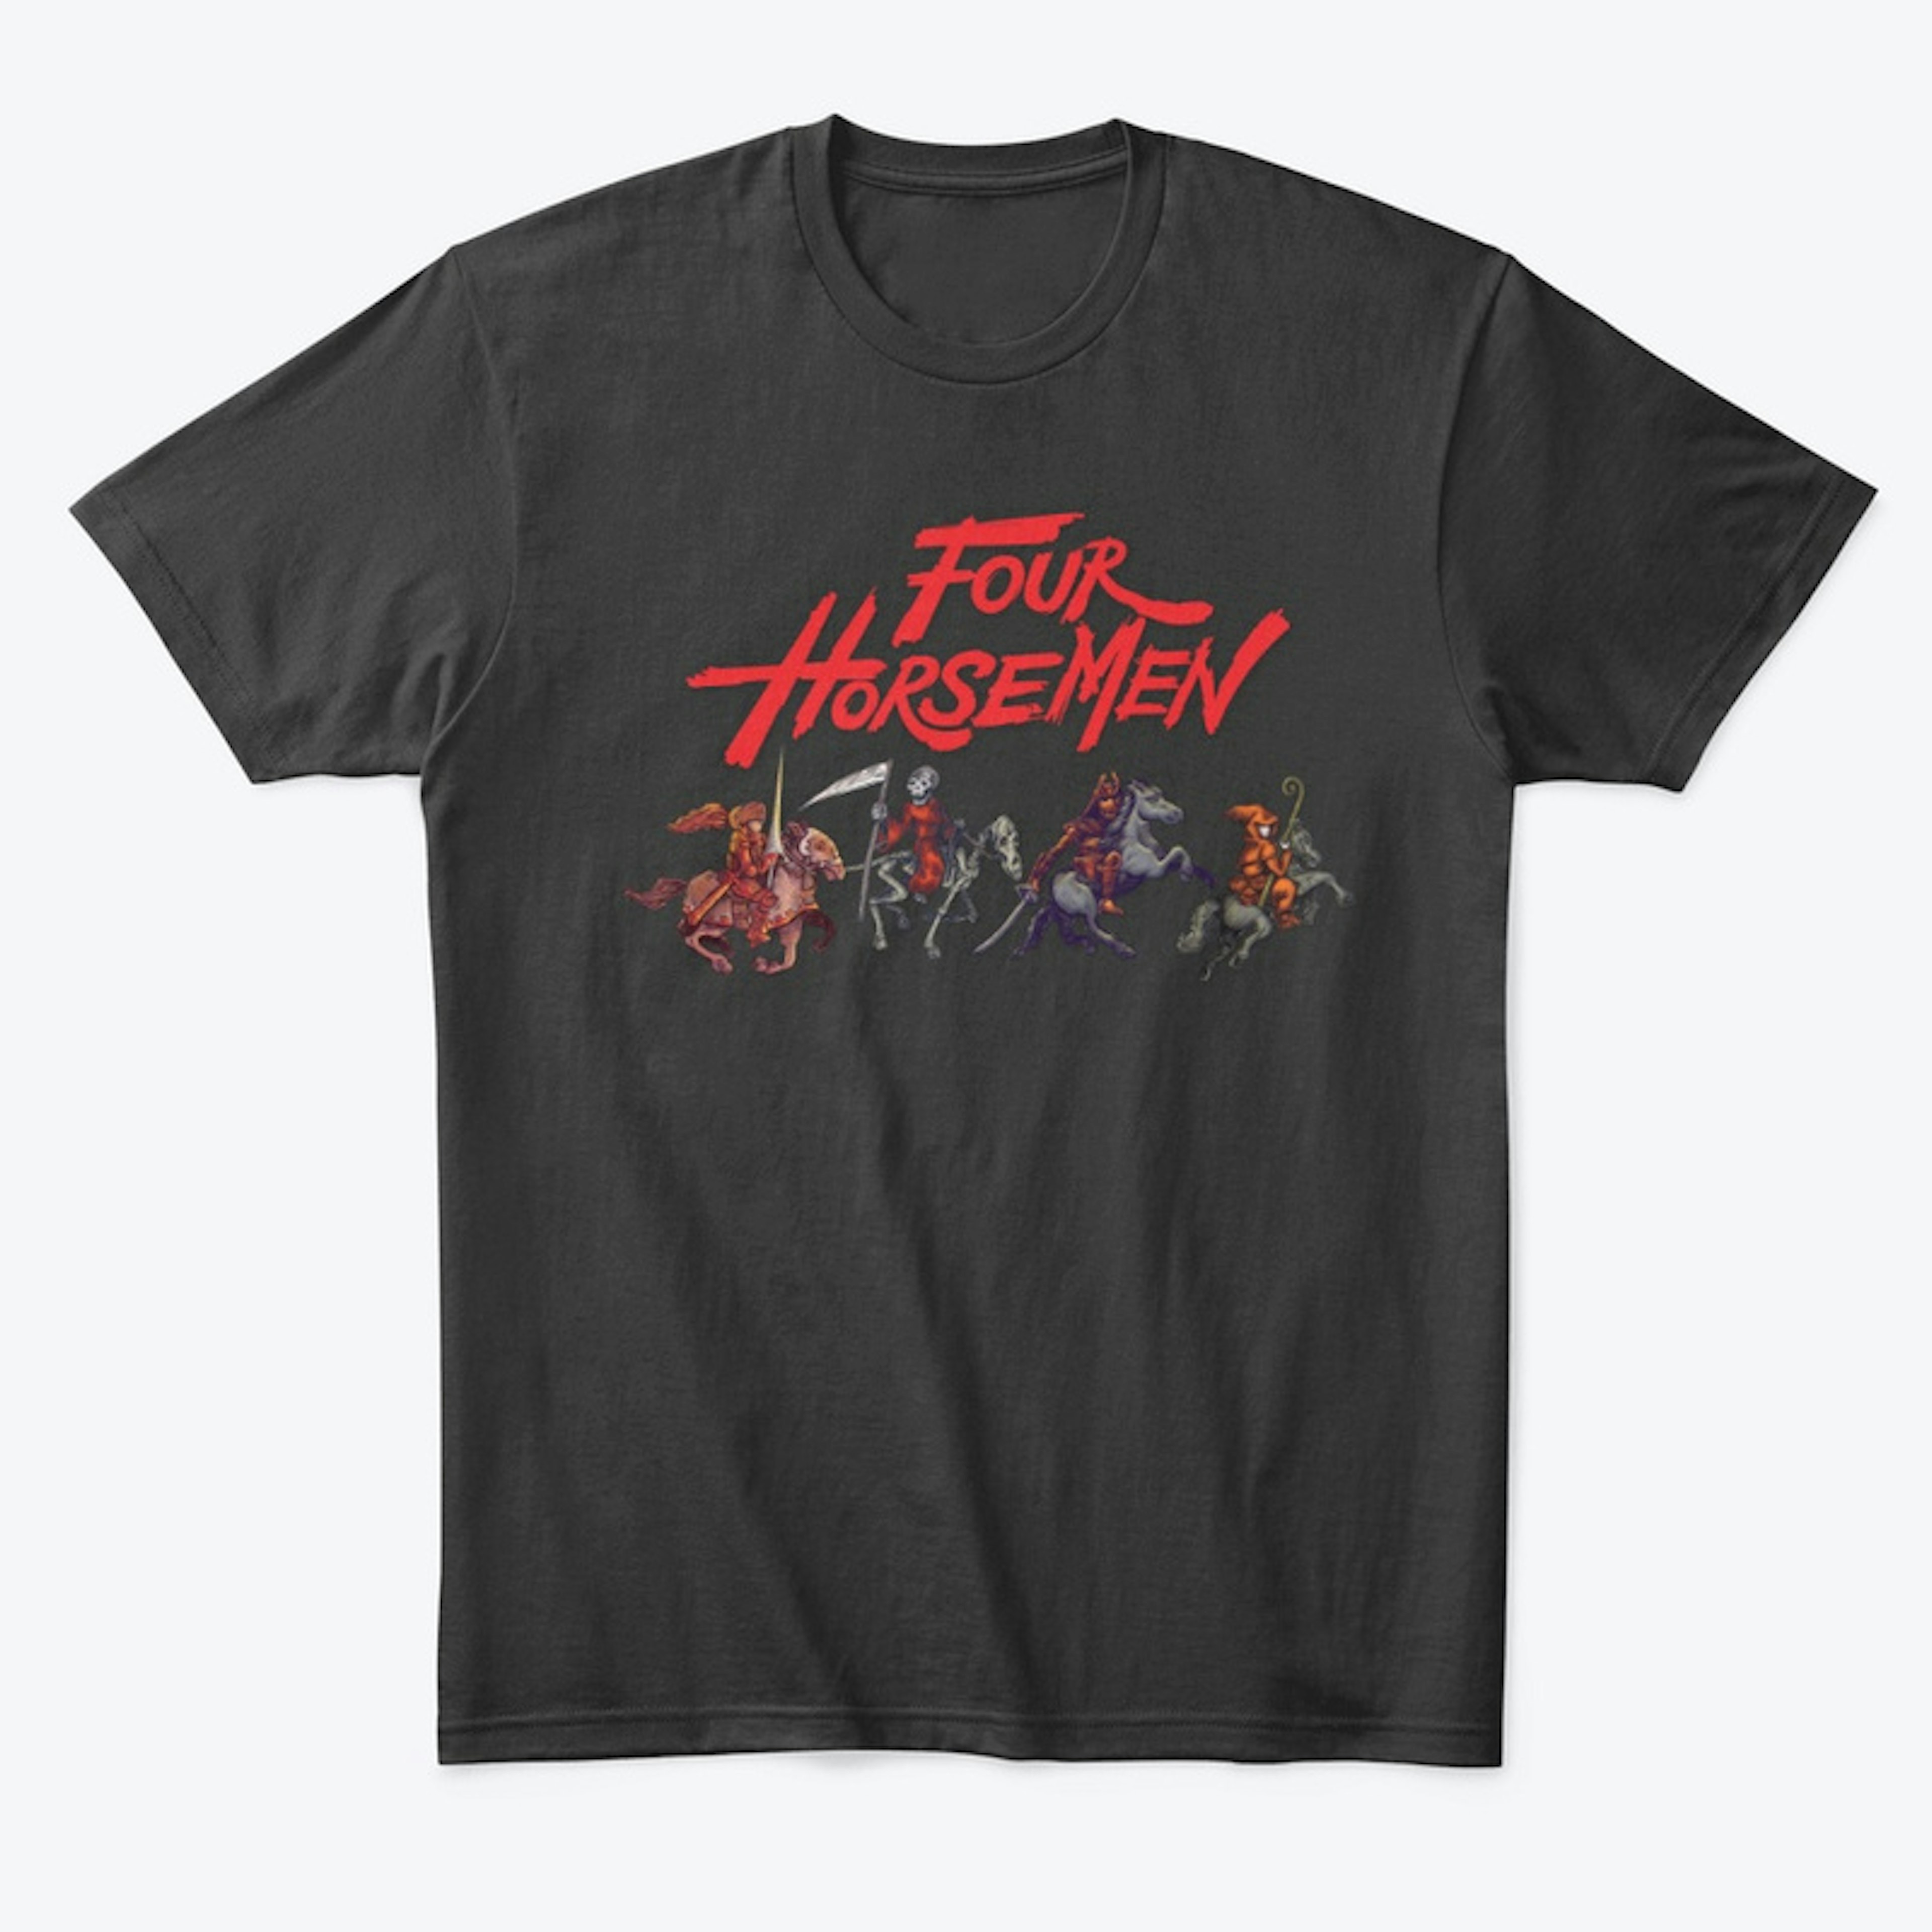 Four Horsemen of the FGC Illustrated Tee